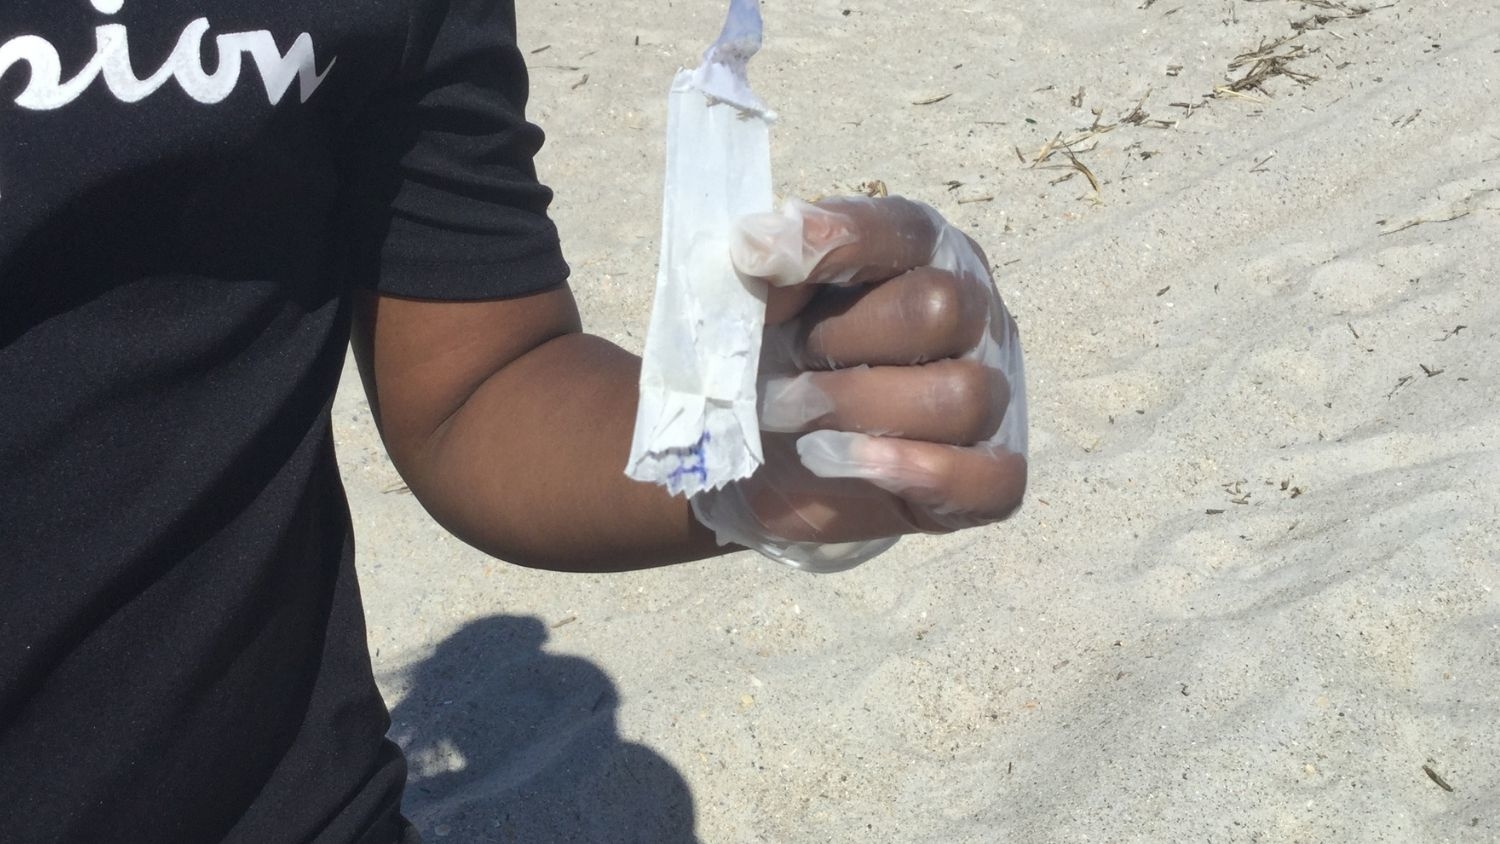 Students picked up trash at the beach in New Hanover County.